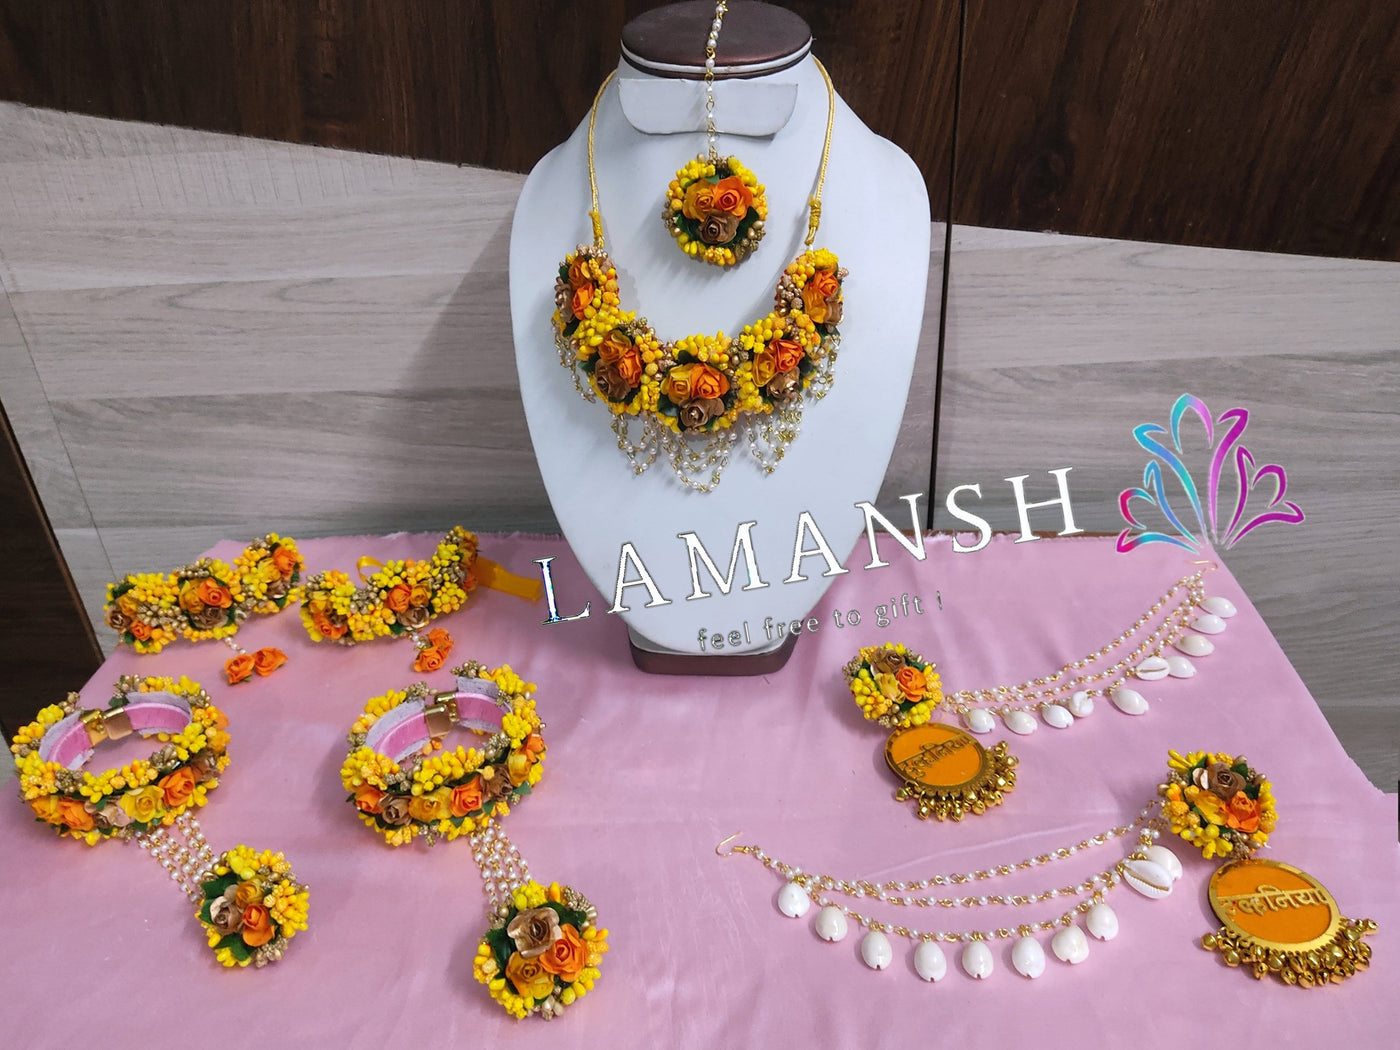 Lamansh Flower 🌺 Jewellery 1 Necklace, 2 Earrings With side Chain ,1 Maangtika, 2 Bajuband & 2 Bracelets Attached with Ring set / Multicolor LAMANSH® Shells 🐚 Handmade Flower Jewellery Set For Women & Girls / Haldi Set